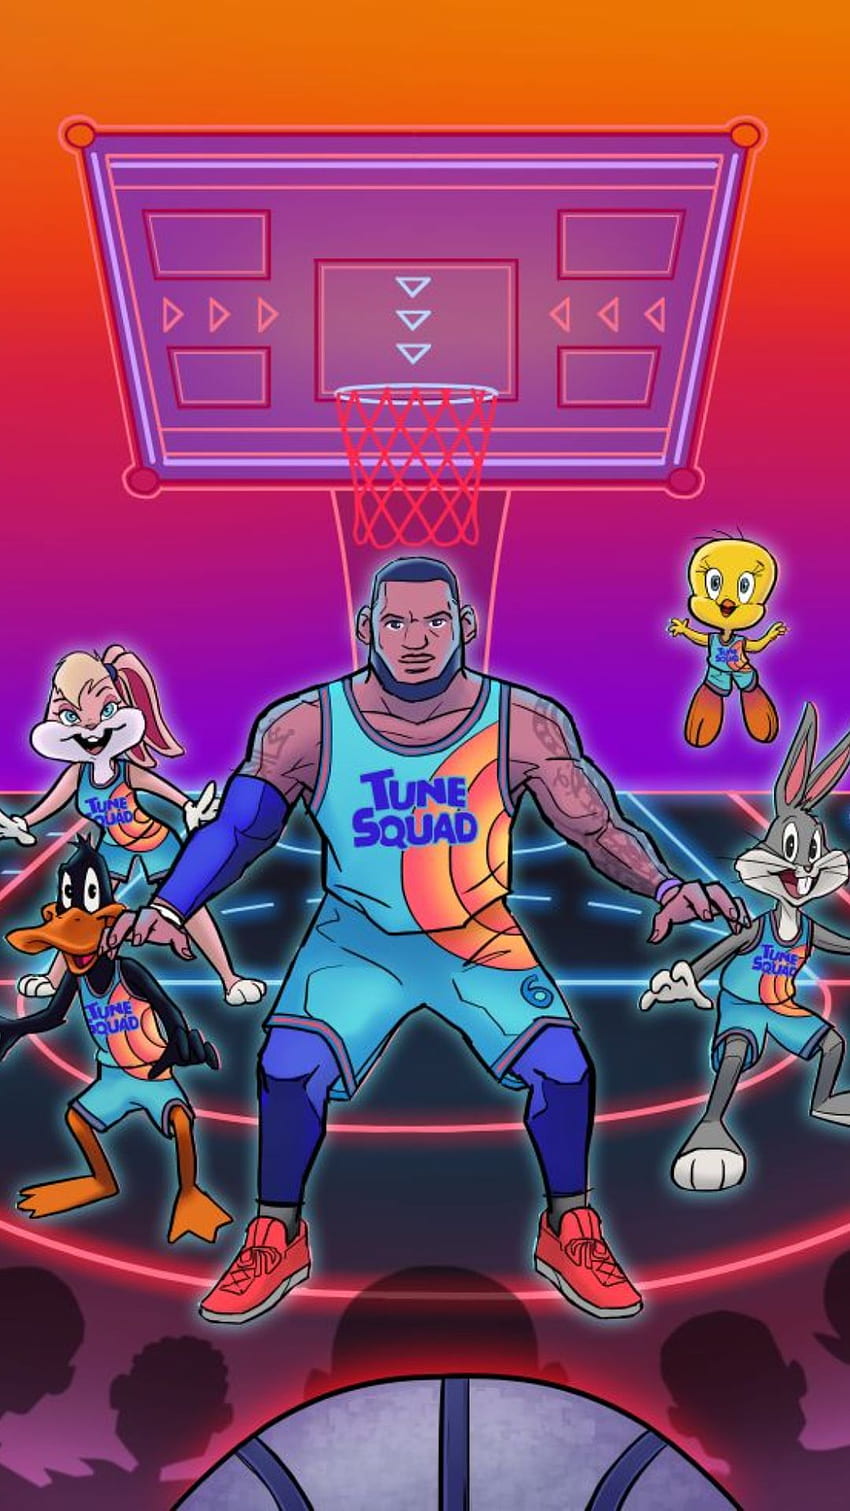 Space Jam 2 phone wallpaper 1080P 2k 4k Full HD Wallpapers Backgrounds  Free Download  Wallpaper Crafter